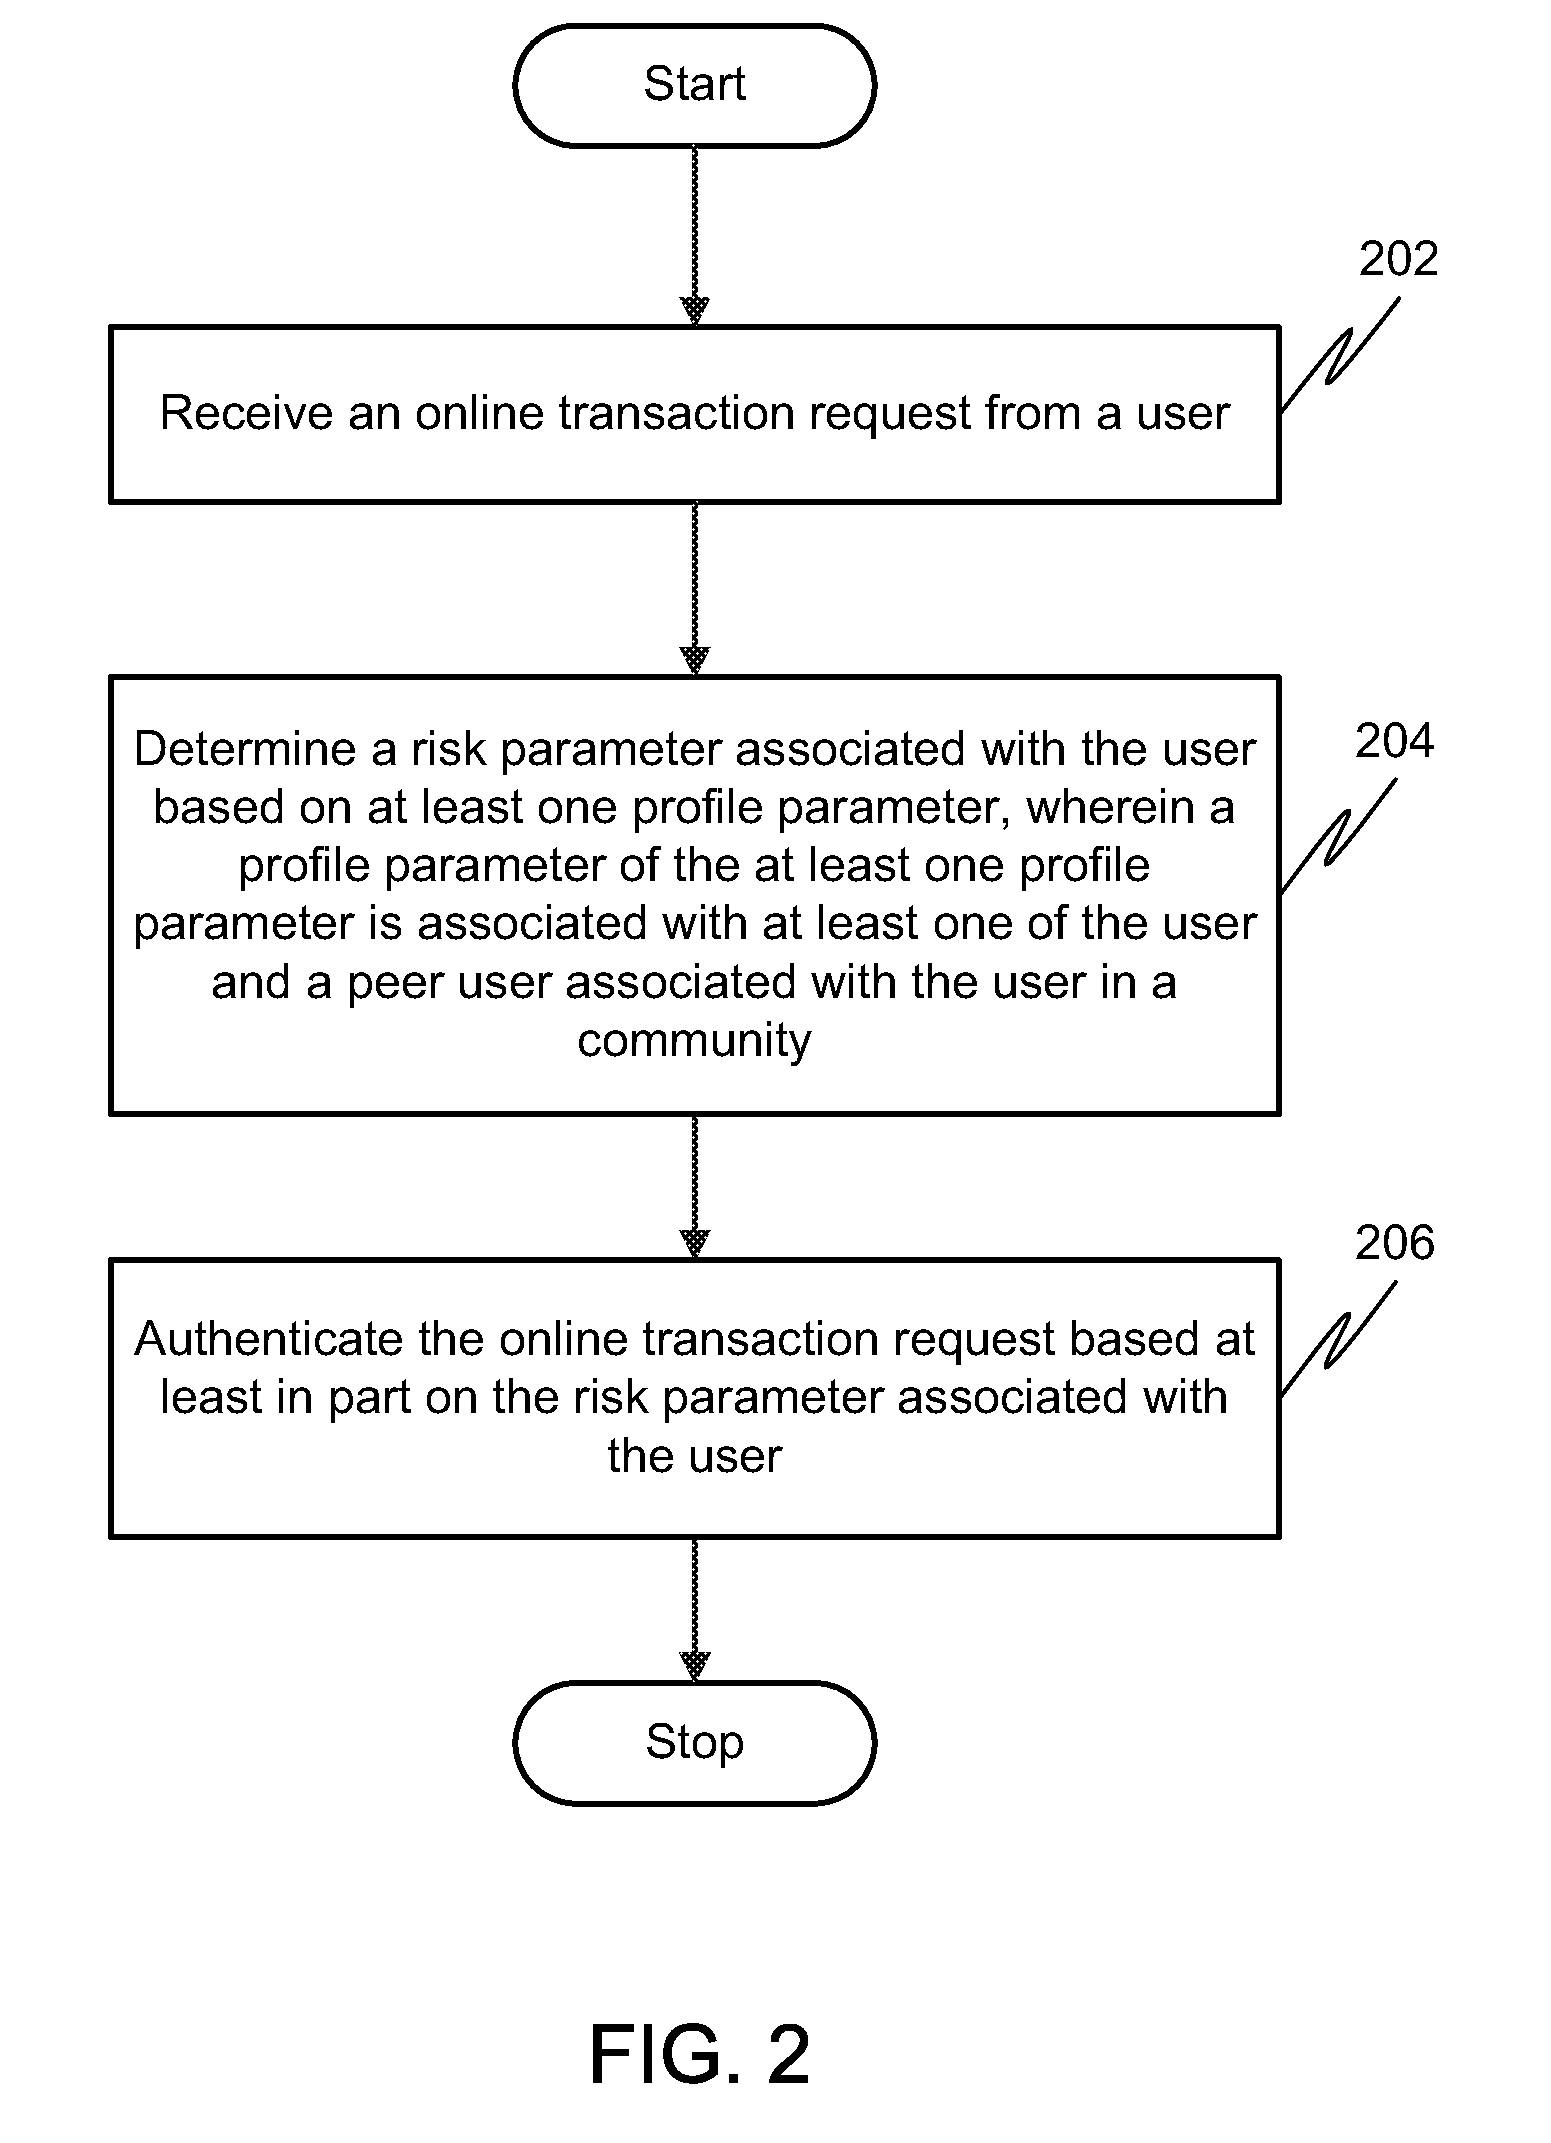 Method and system for authenticating online transactions